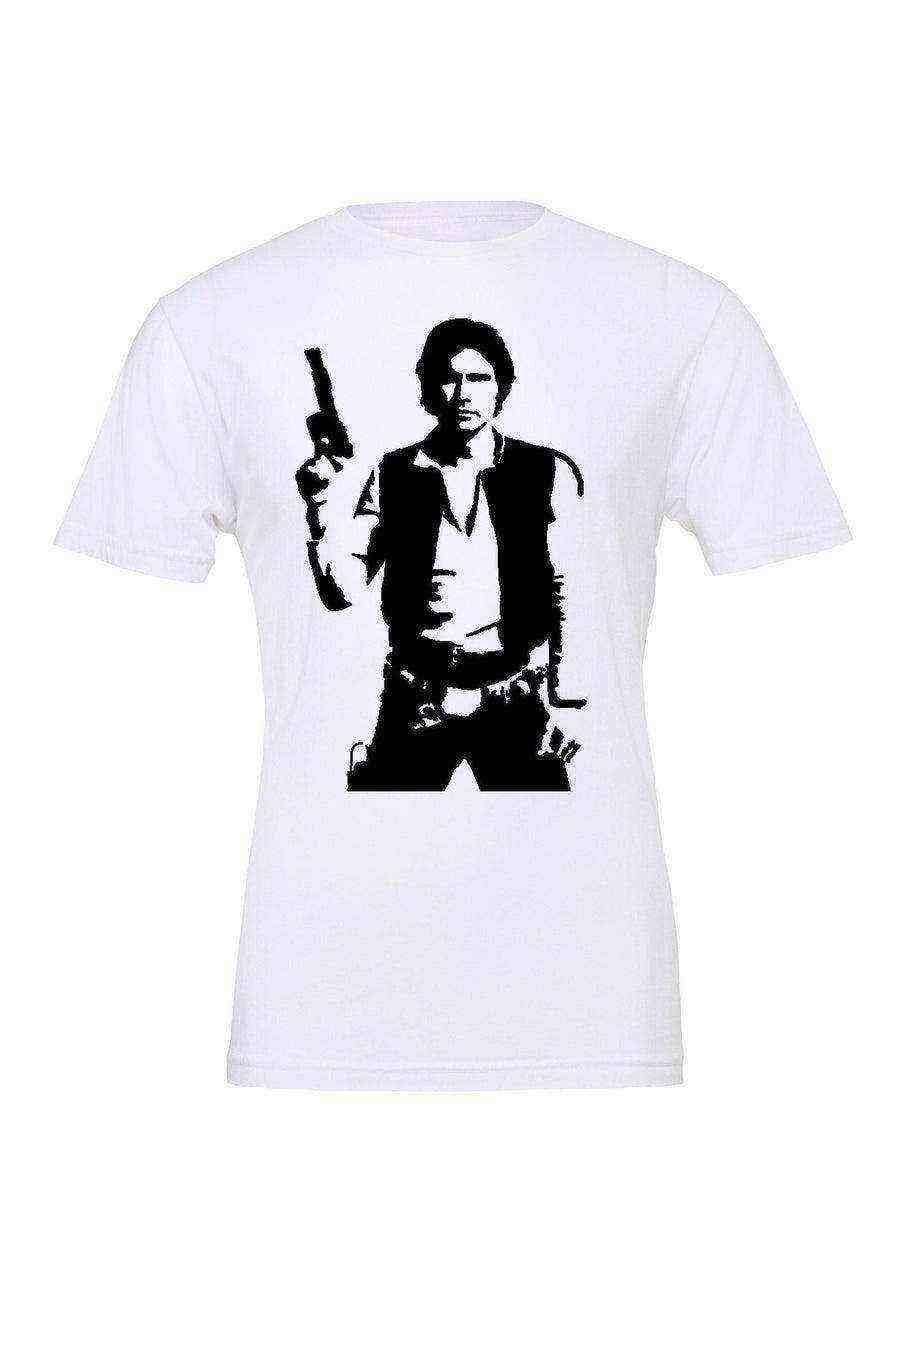 Toddler | Han Solo Tee - Dylan's Tees